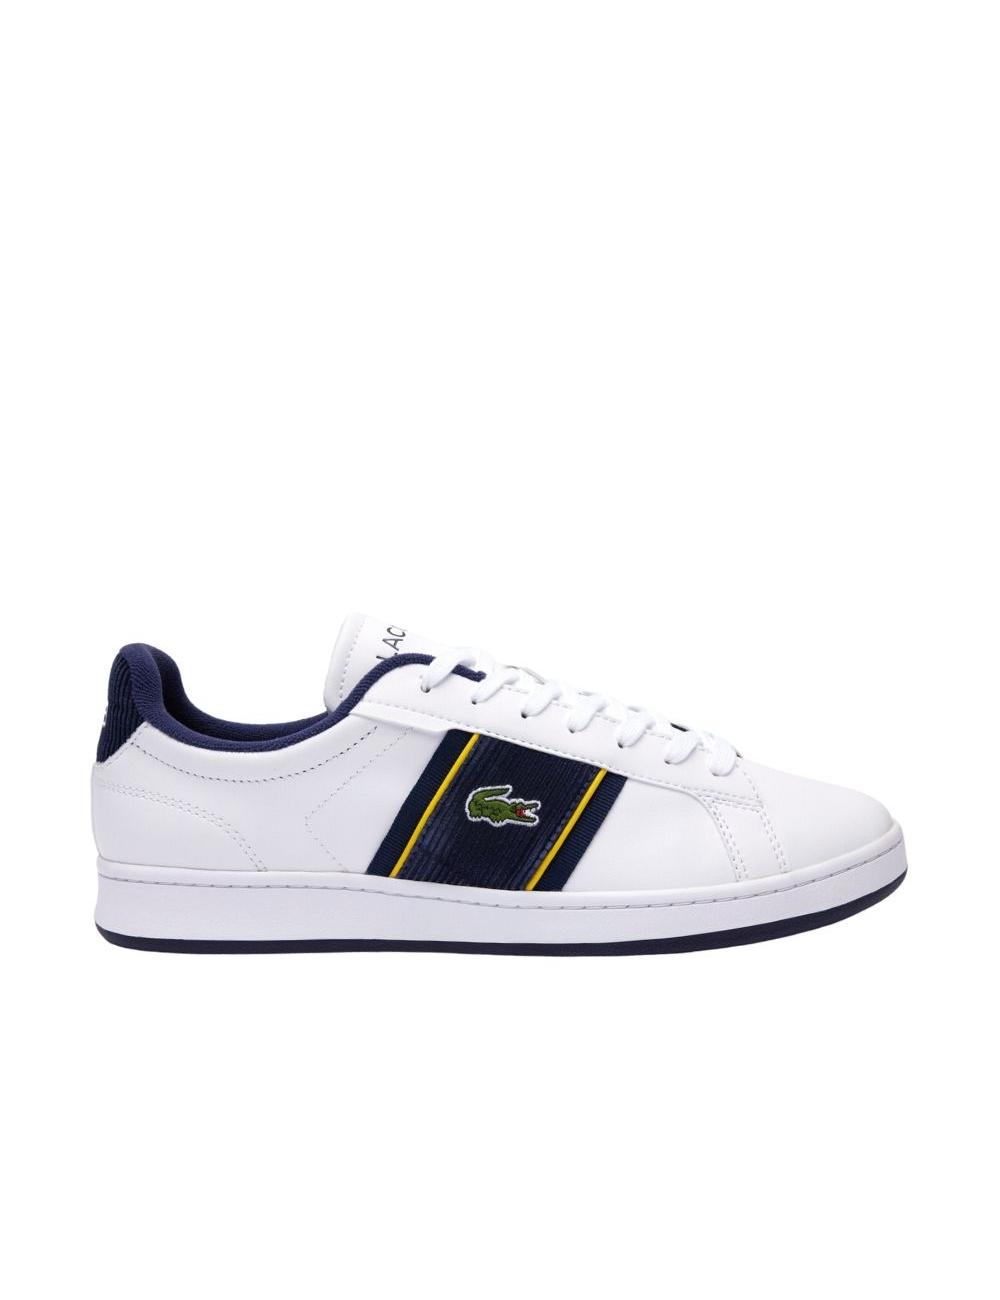 SNEAKER HOMBRE LACOSTE CARNABY PRO CGR BAR 46SMA0038